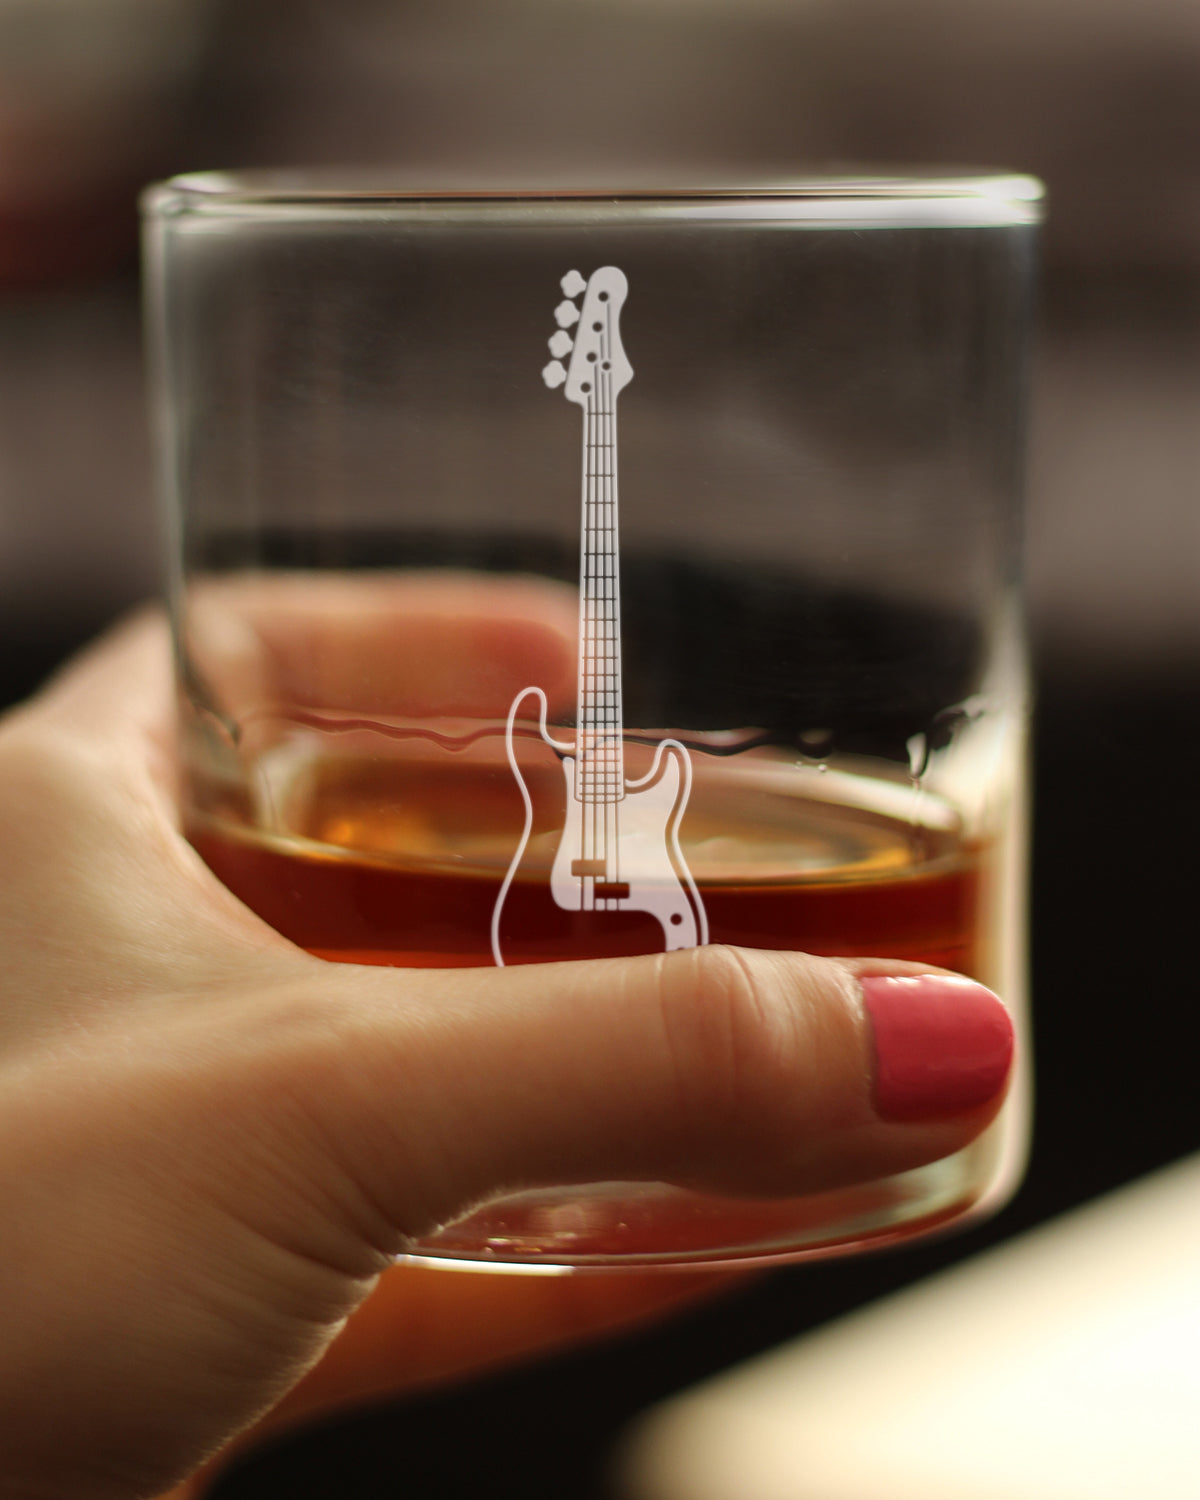 Electric Bass Rocks Glass - Music Gifts for Bass Players, Teachers and Musical Accessories for Musicians that Play Bass Guitar - 10.25 Oz Glasses